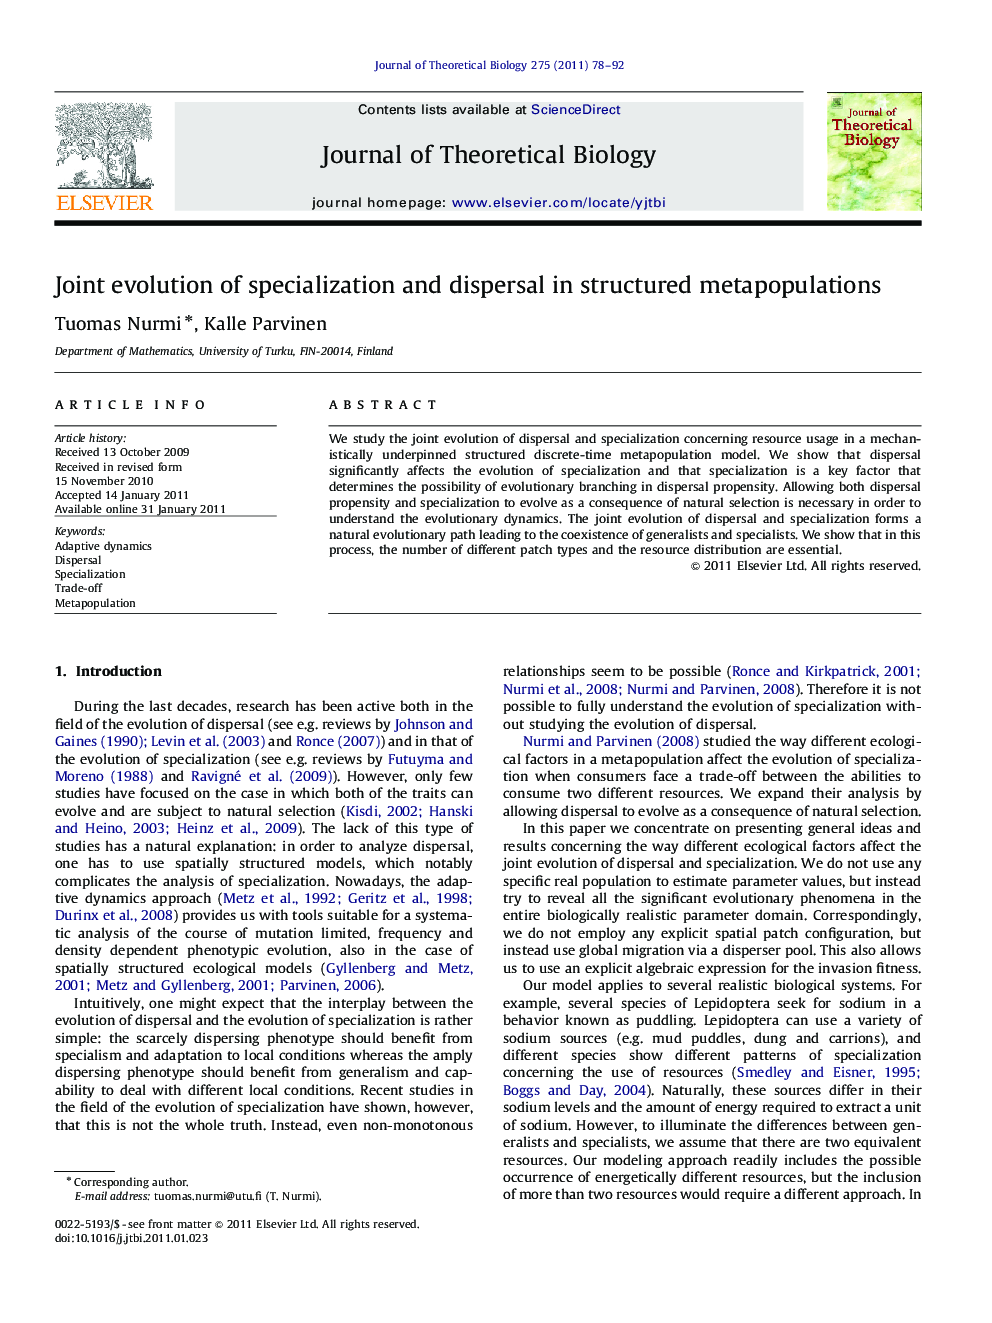 Joint evolution of specialization and dispersal in structured metapopulations